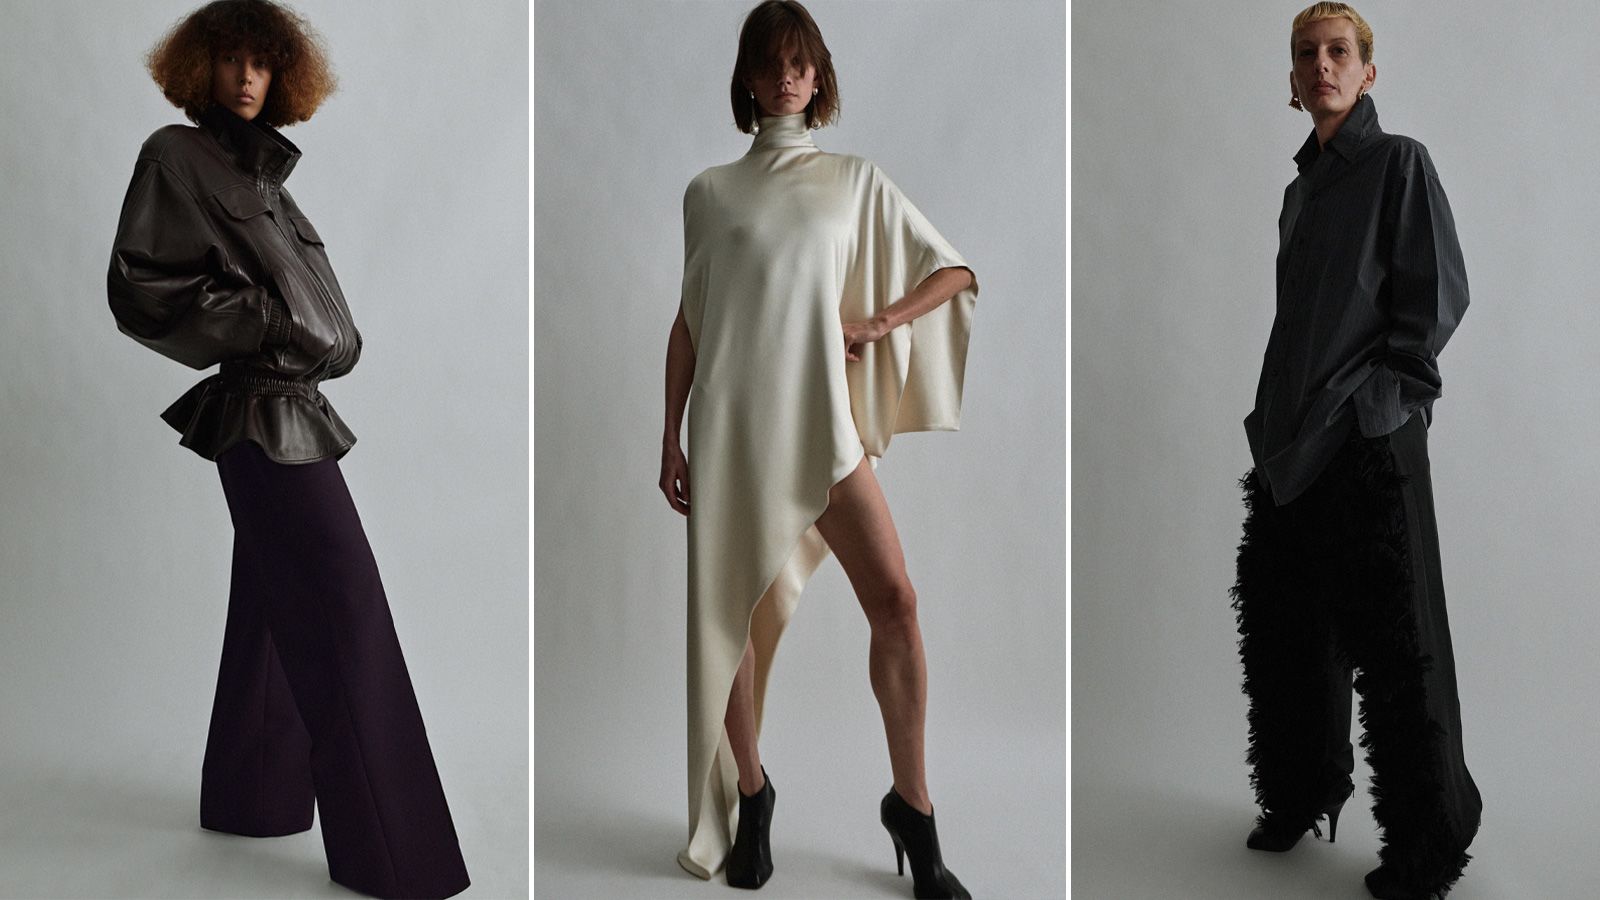 Phoebe Philo's Debut Collection Has Come (And Nearly Gone)